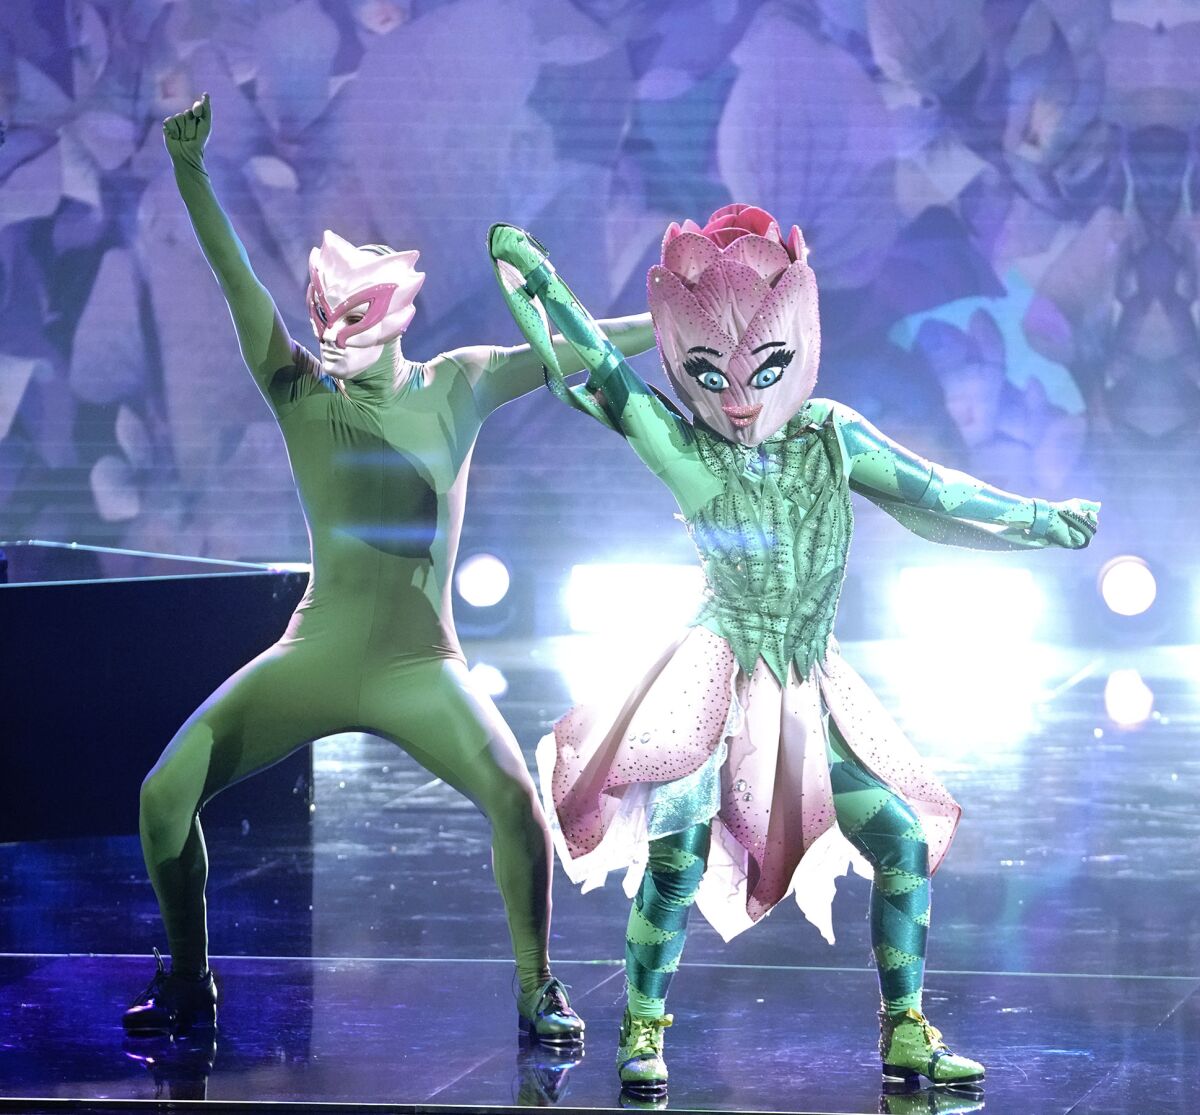 Two people in green leotards with tulip headdresses dance on stage.